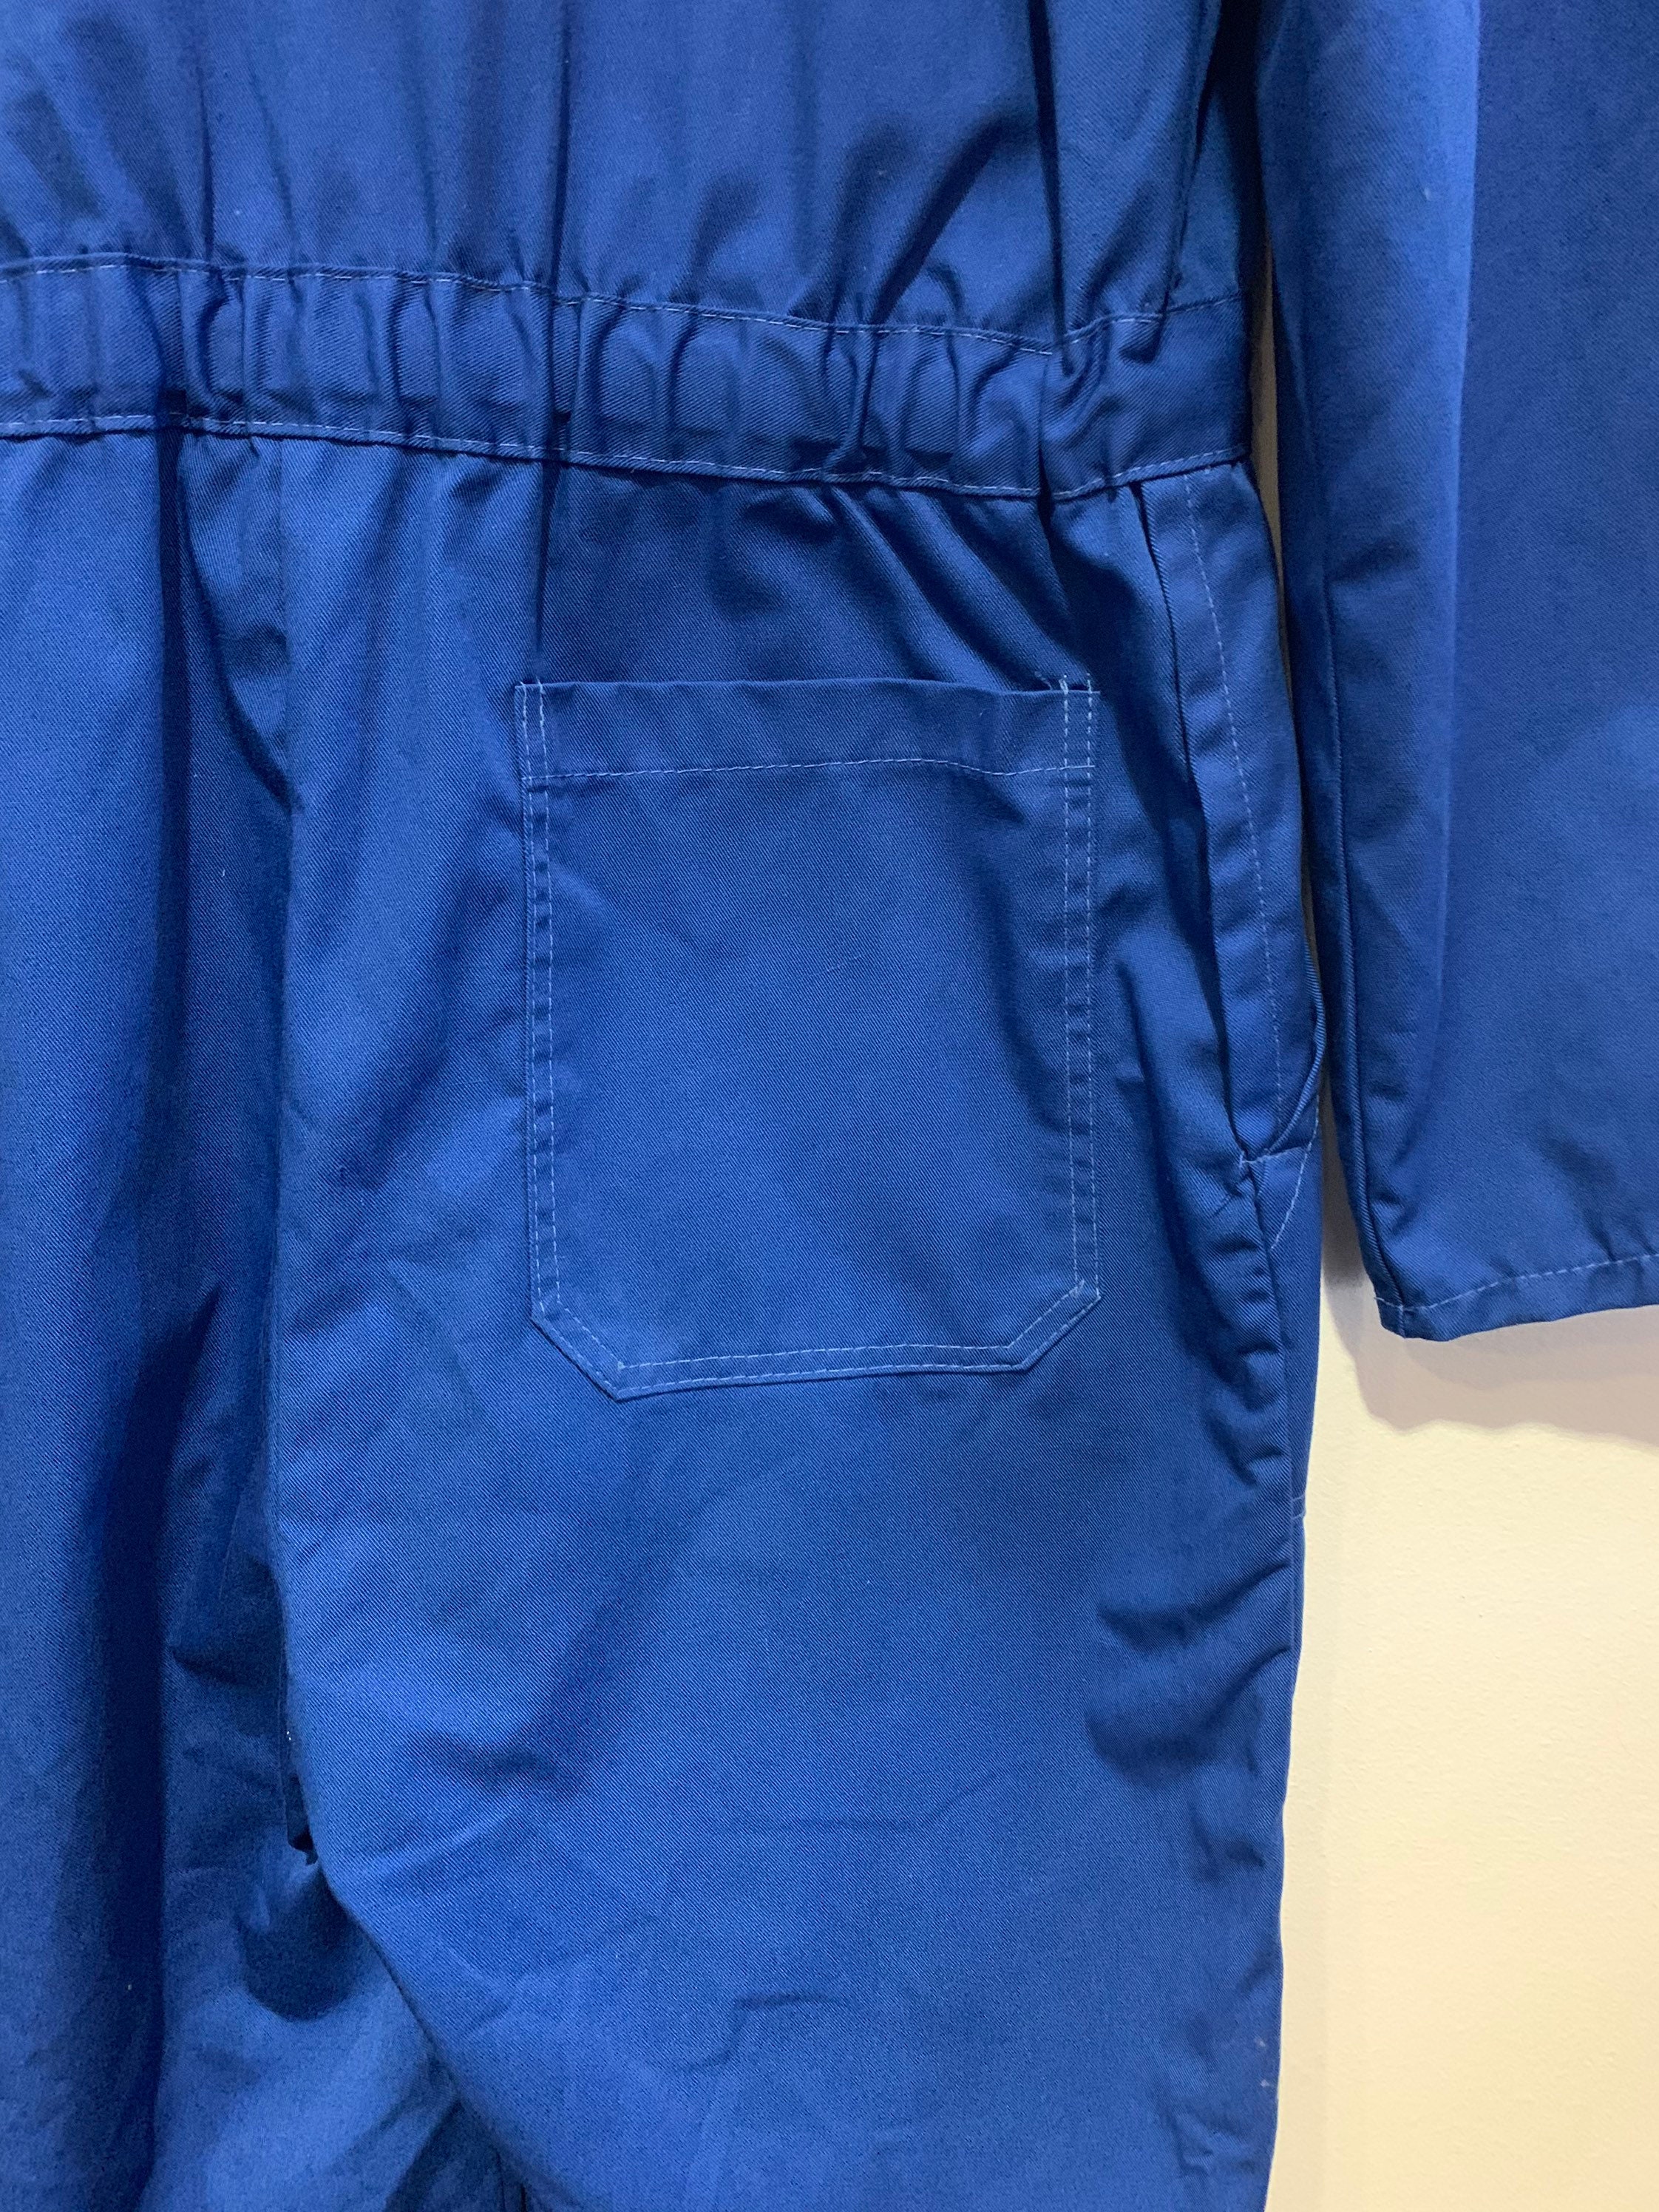 Ford Made In England Blue Overalls | Etsy